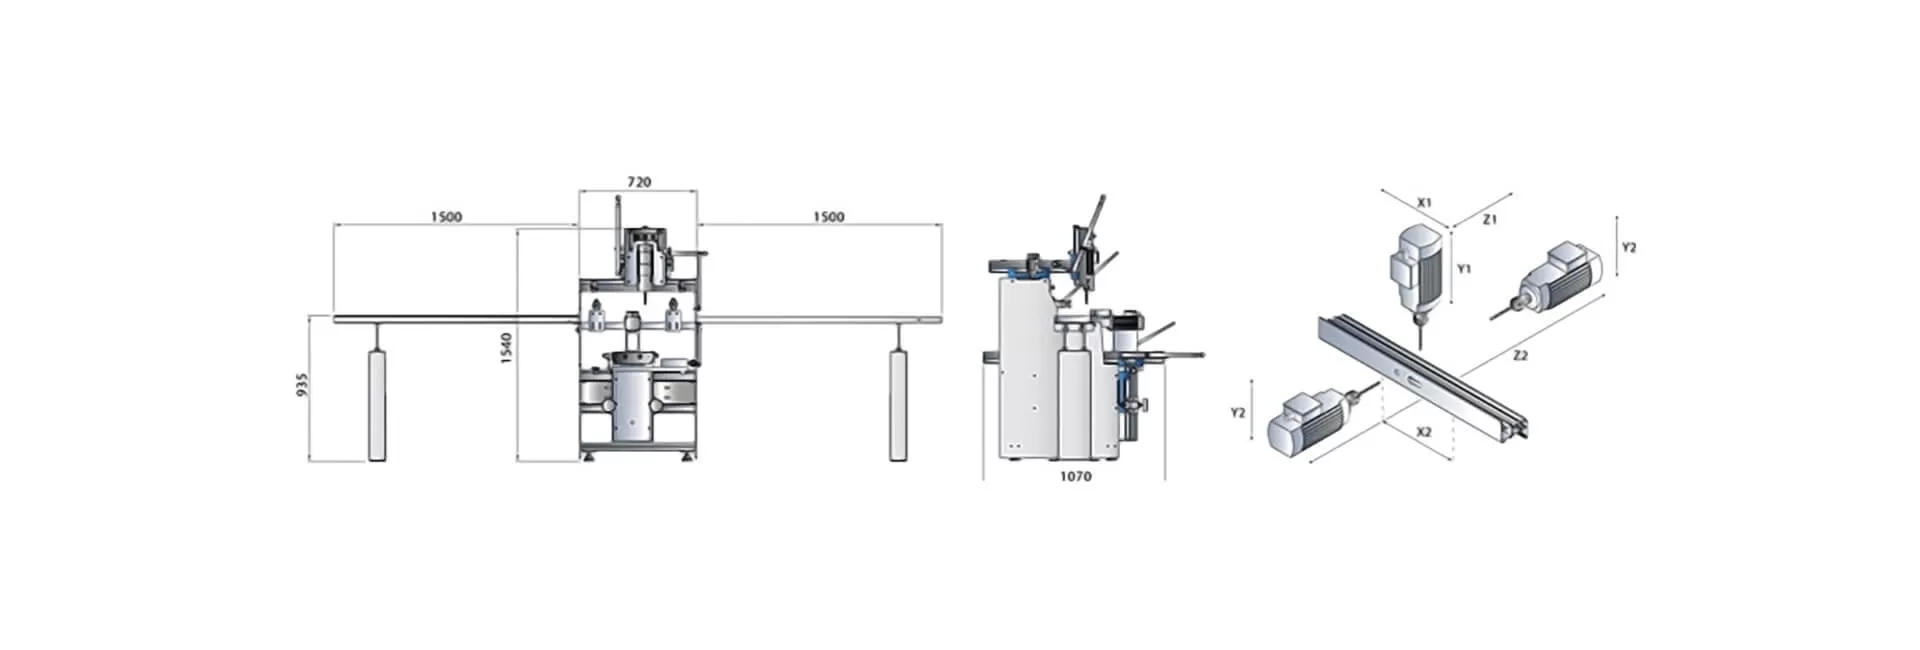 AS 447 3 Spindle Copy Router